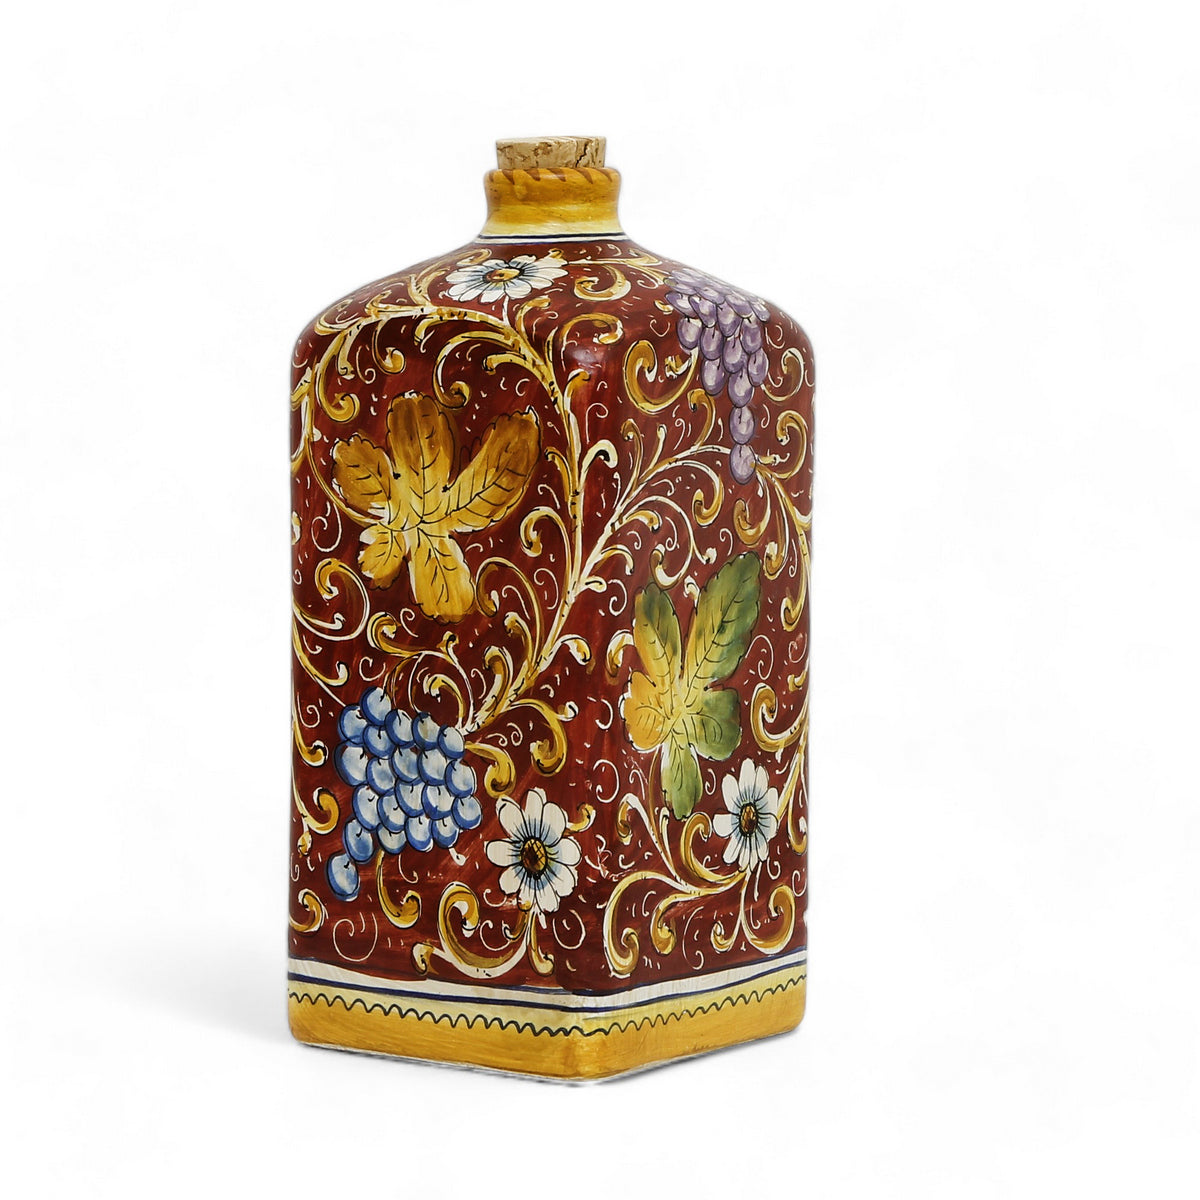 TUSCAN MAJOLICA: Old World Tuscan square bottle with cork with Leaves and grape designs on a Burgundy red background